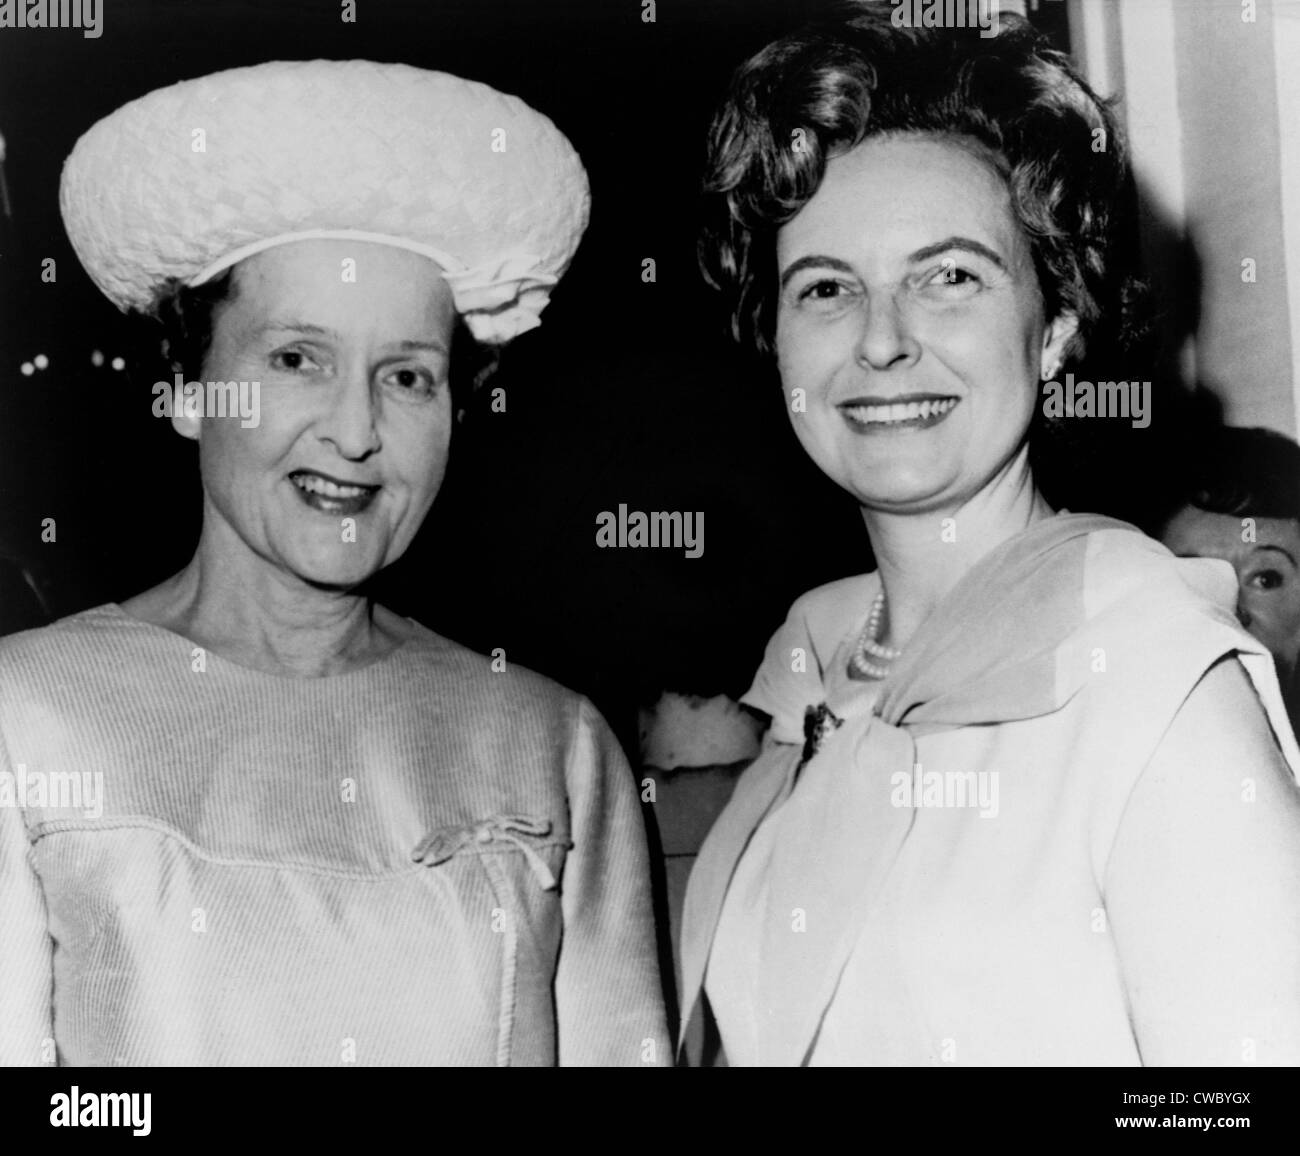 Conservative politician, Phyllis Schlafly (right), with Mrs. Gladys O'Donnell, the moderate candidate for the presidency of the Stock Photo